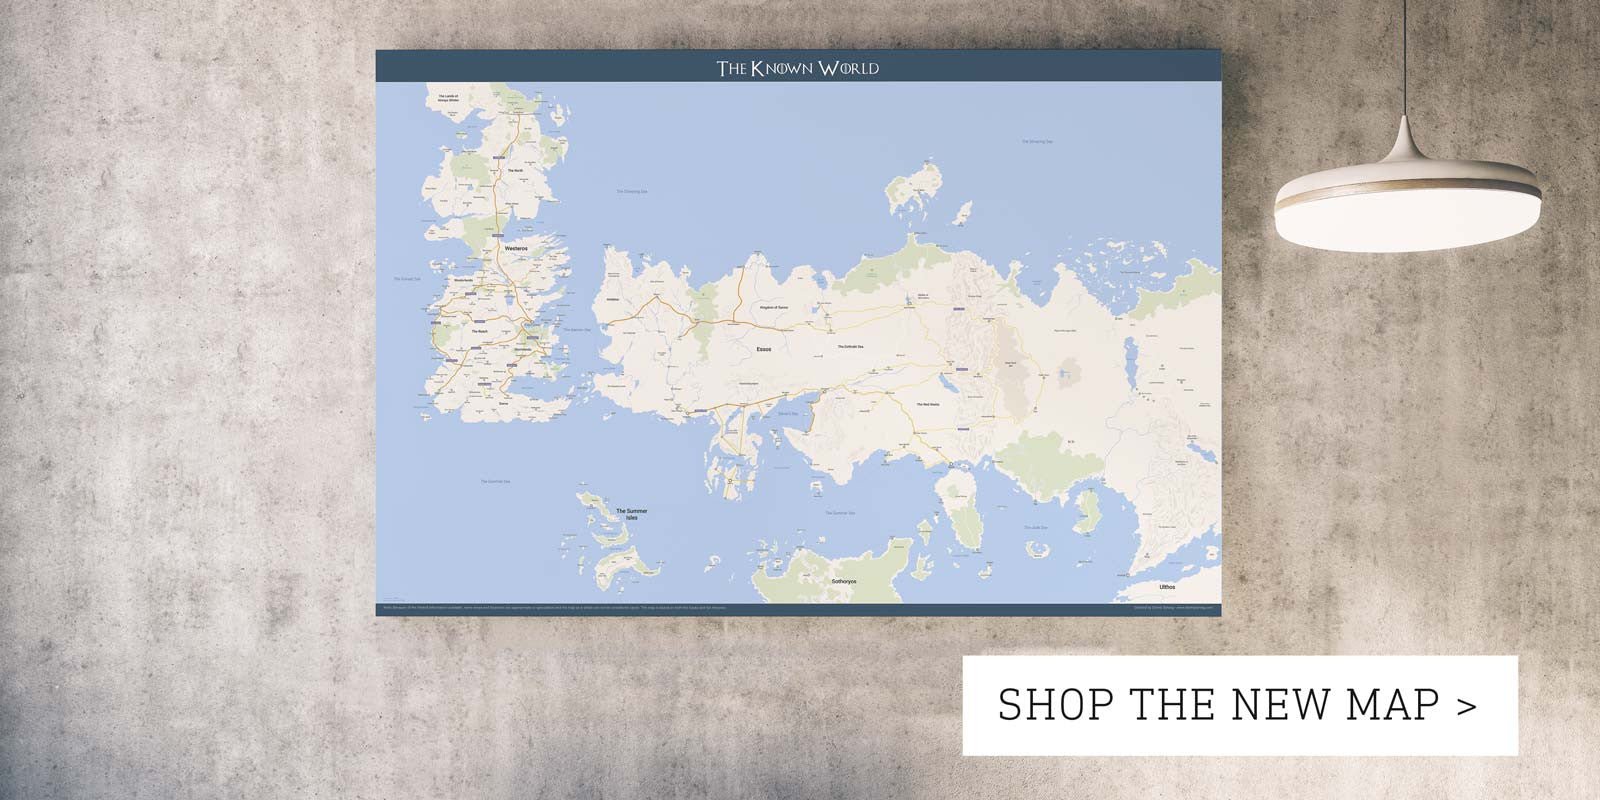 New Game of Thrones Map featuring Westeros & Essos!